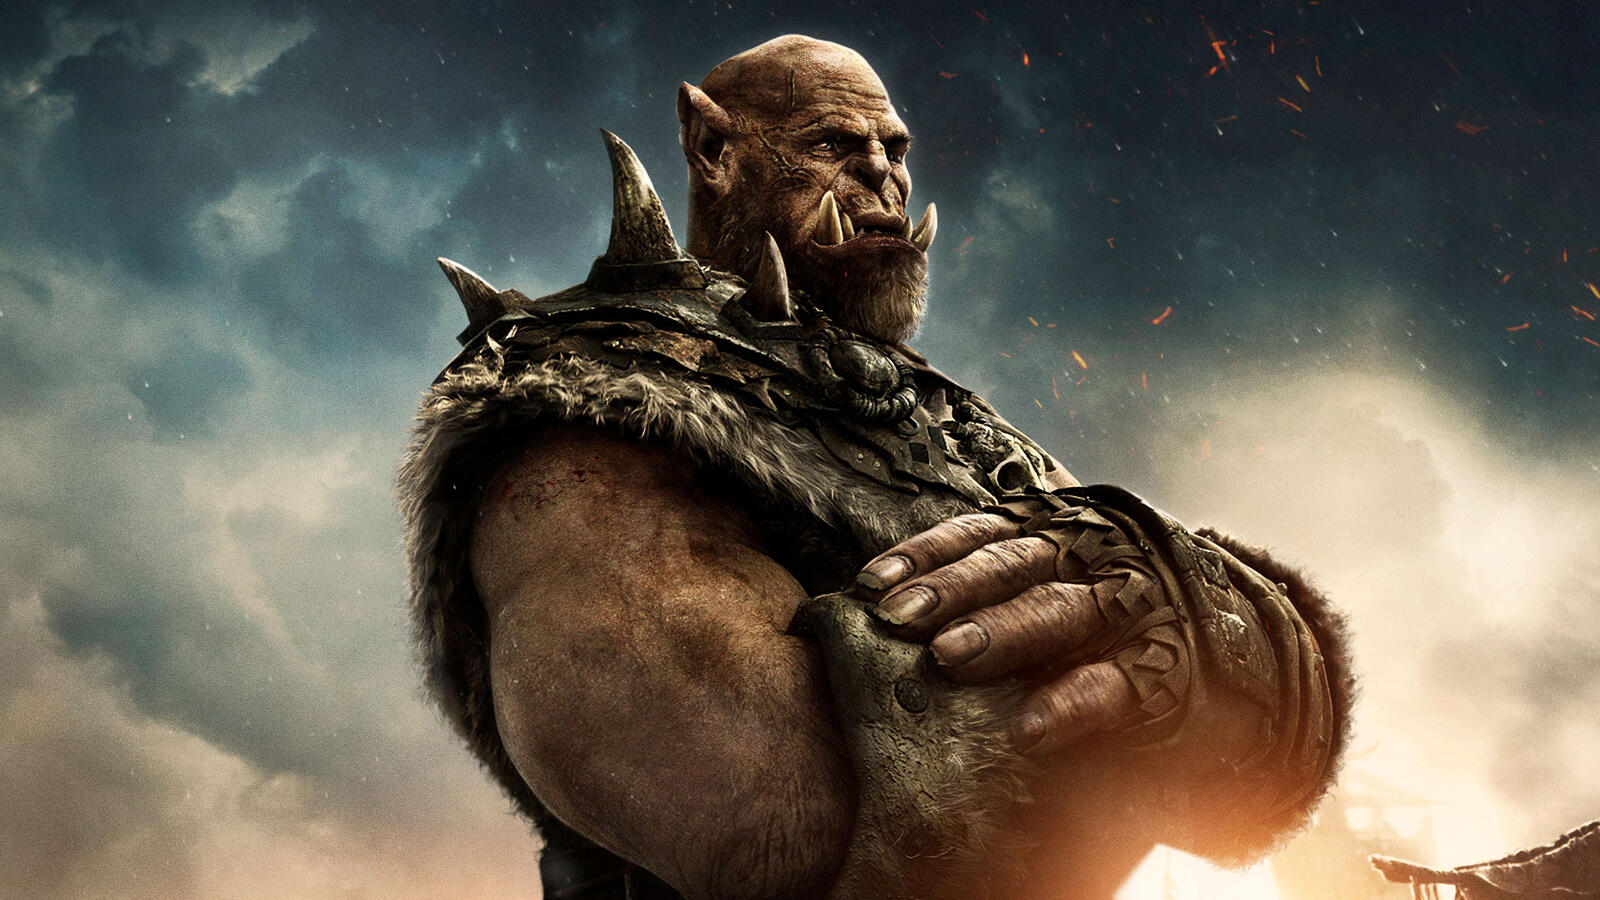 Wallpapers Warcraft movies pictures on the desktop